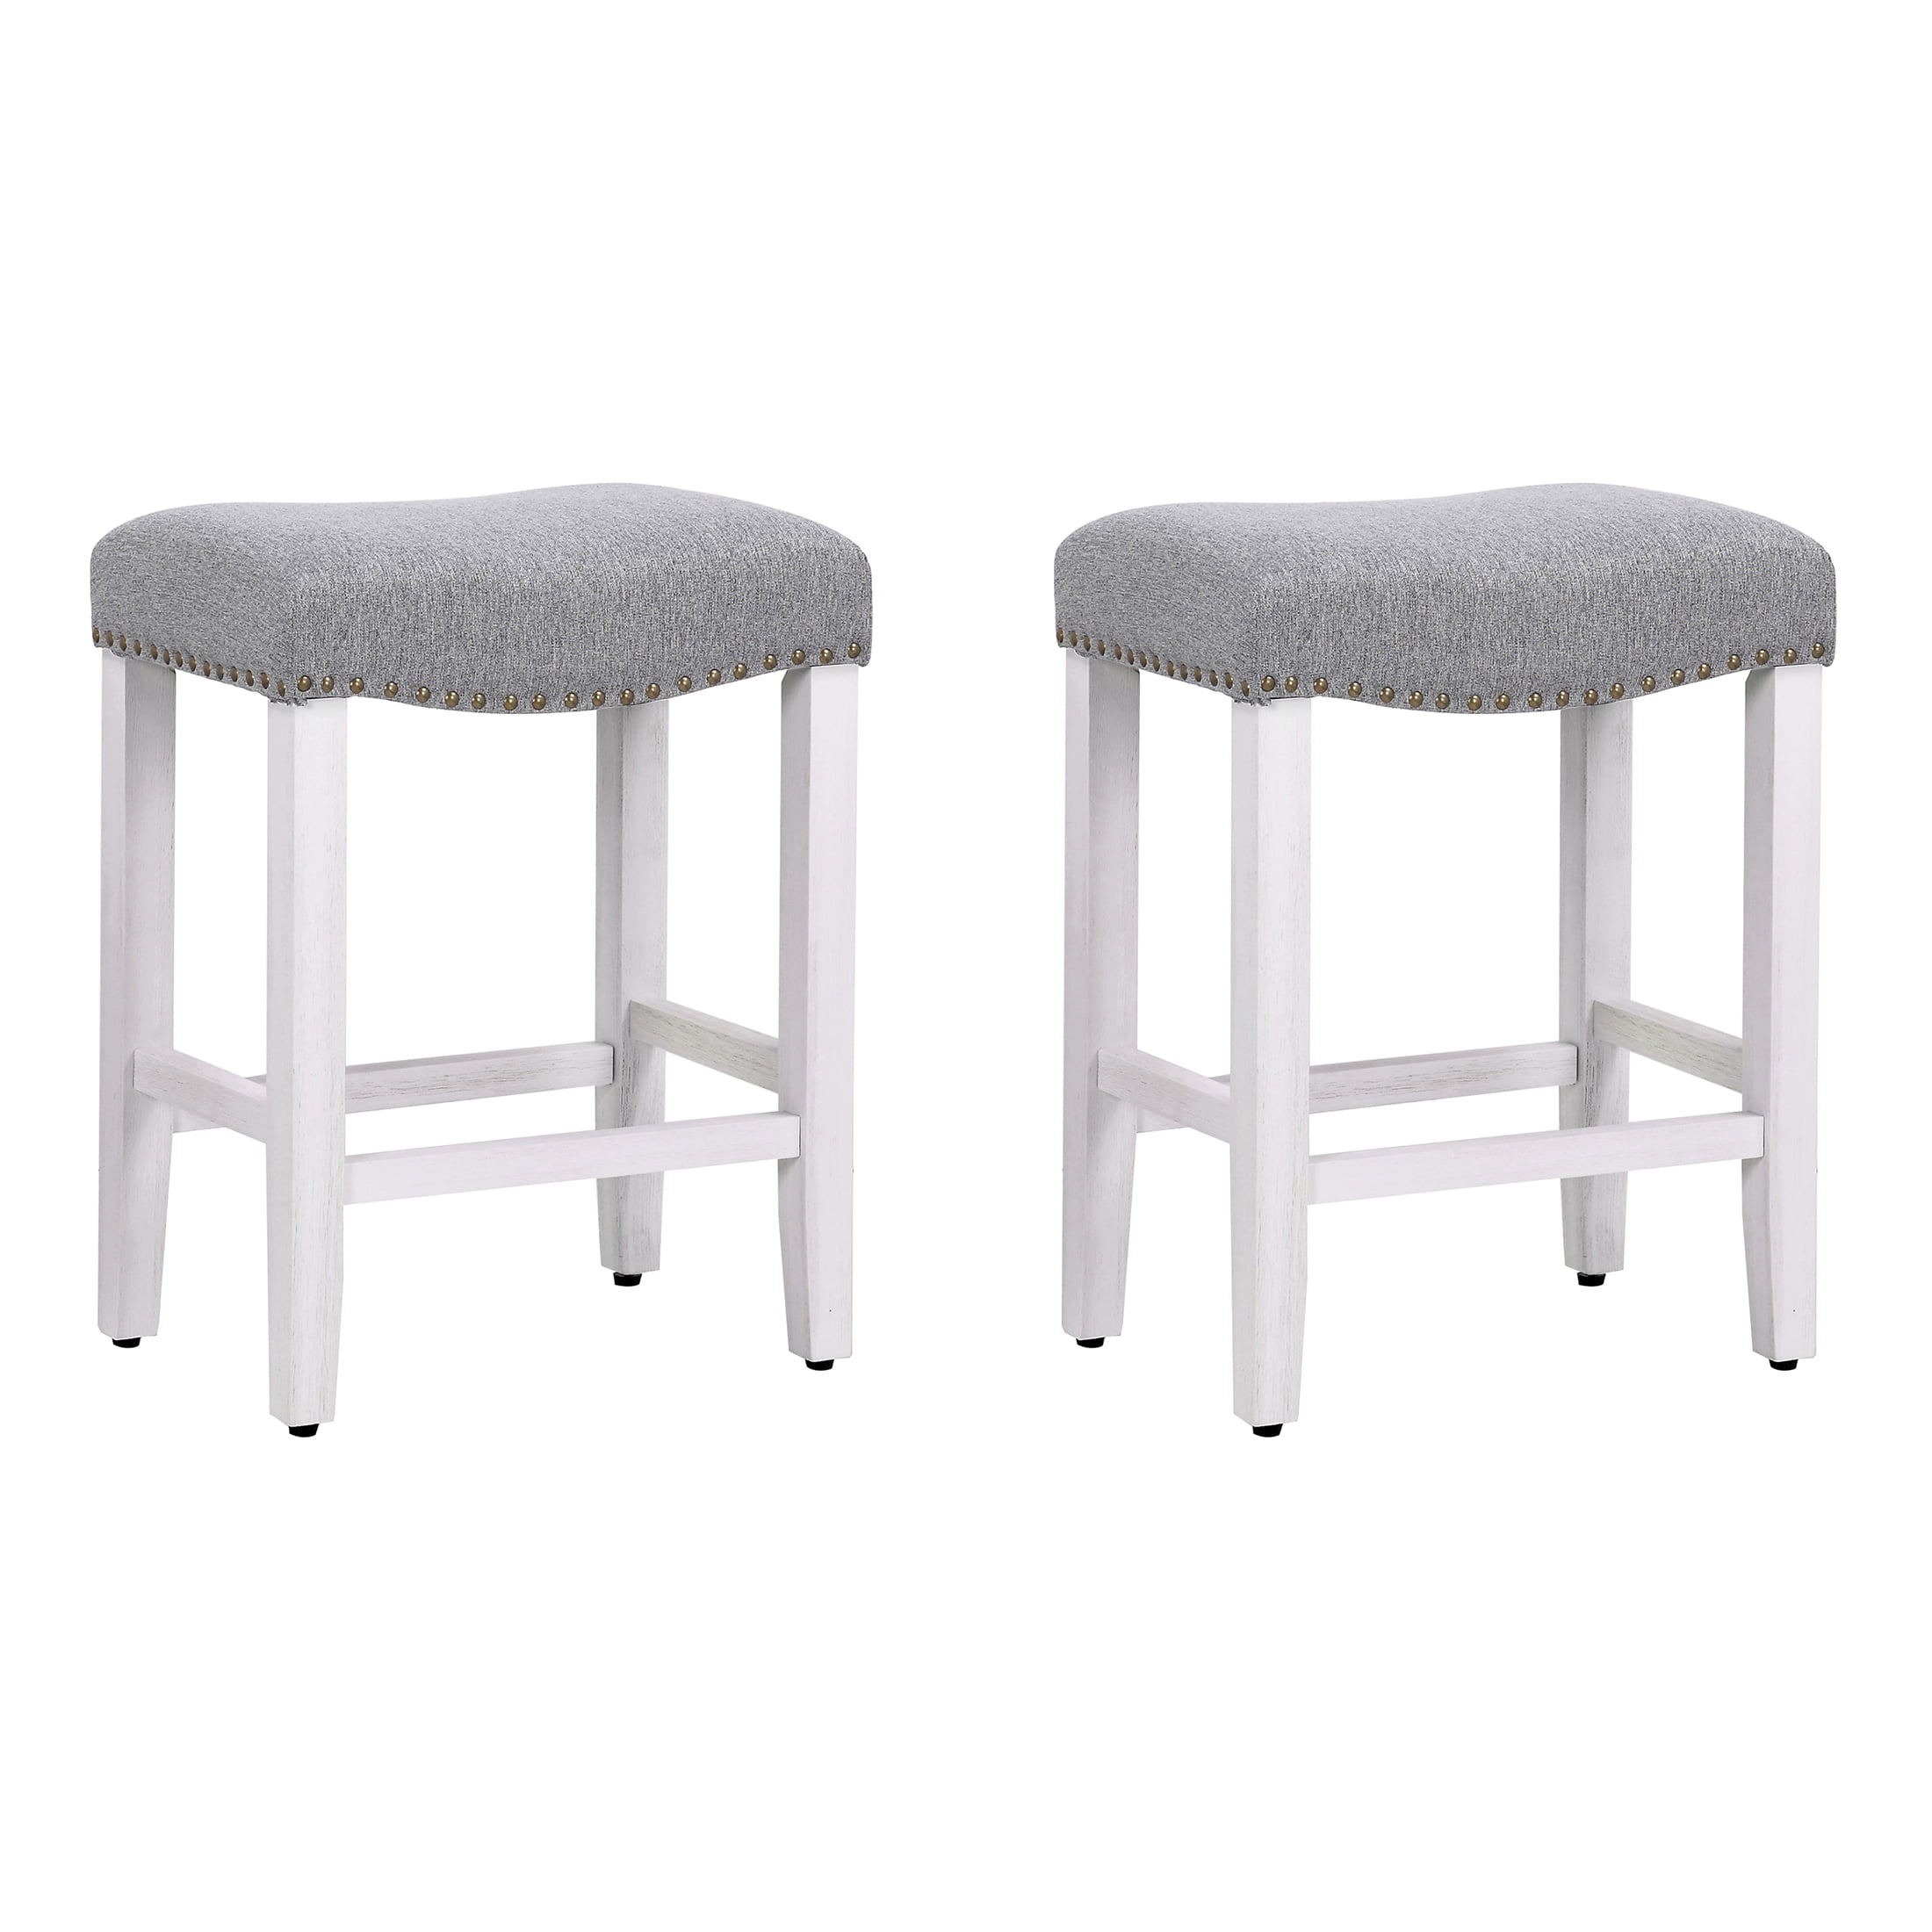 WestinTrends Counter Height Bar Stools Set of 2, 24 Inch Modern Farmhouse  Saddle Stool Chair, Linen Upholstered Cushion with Solid Wood Leg for